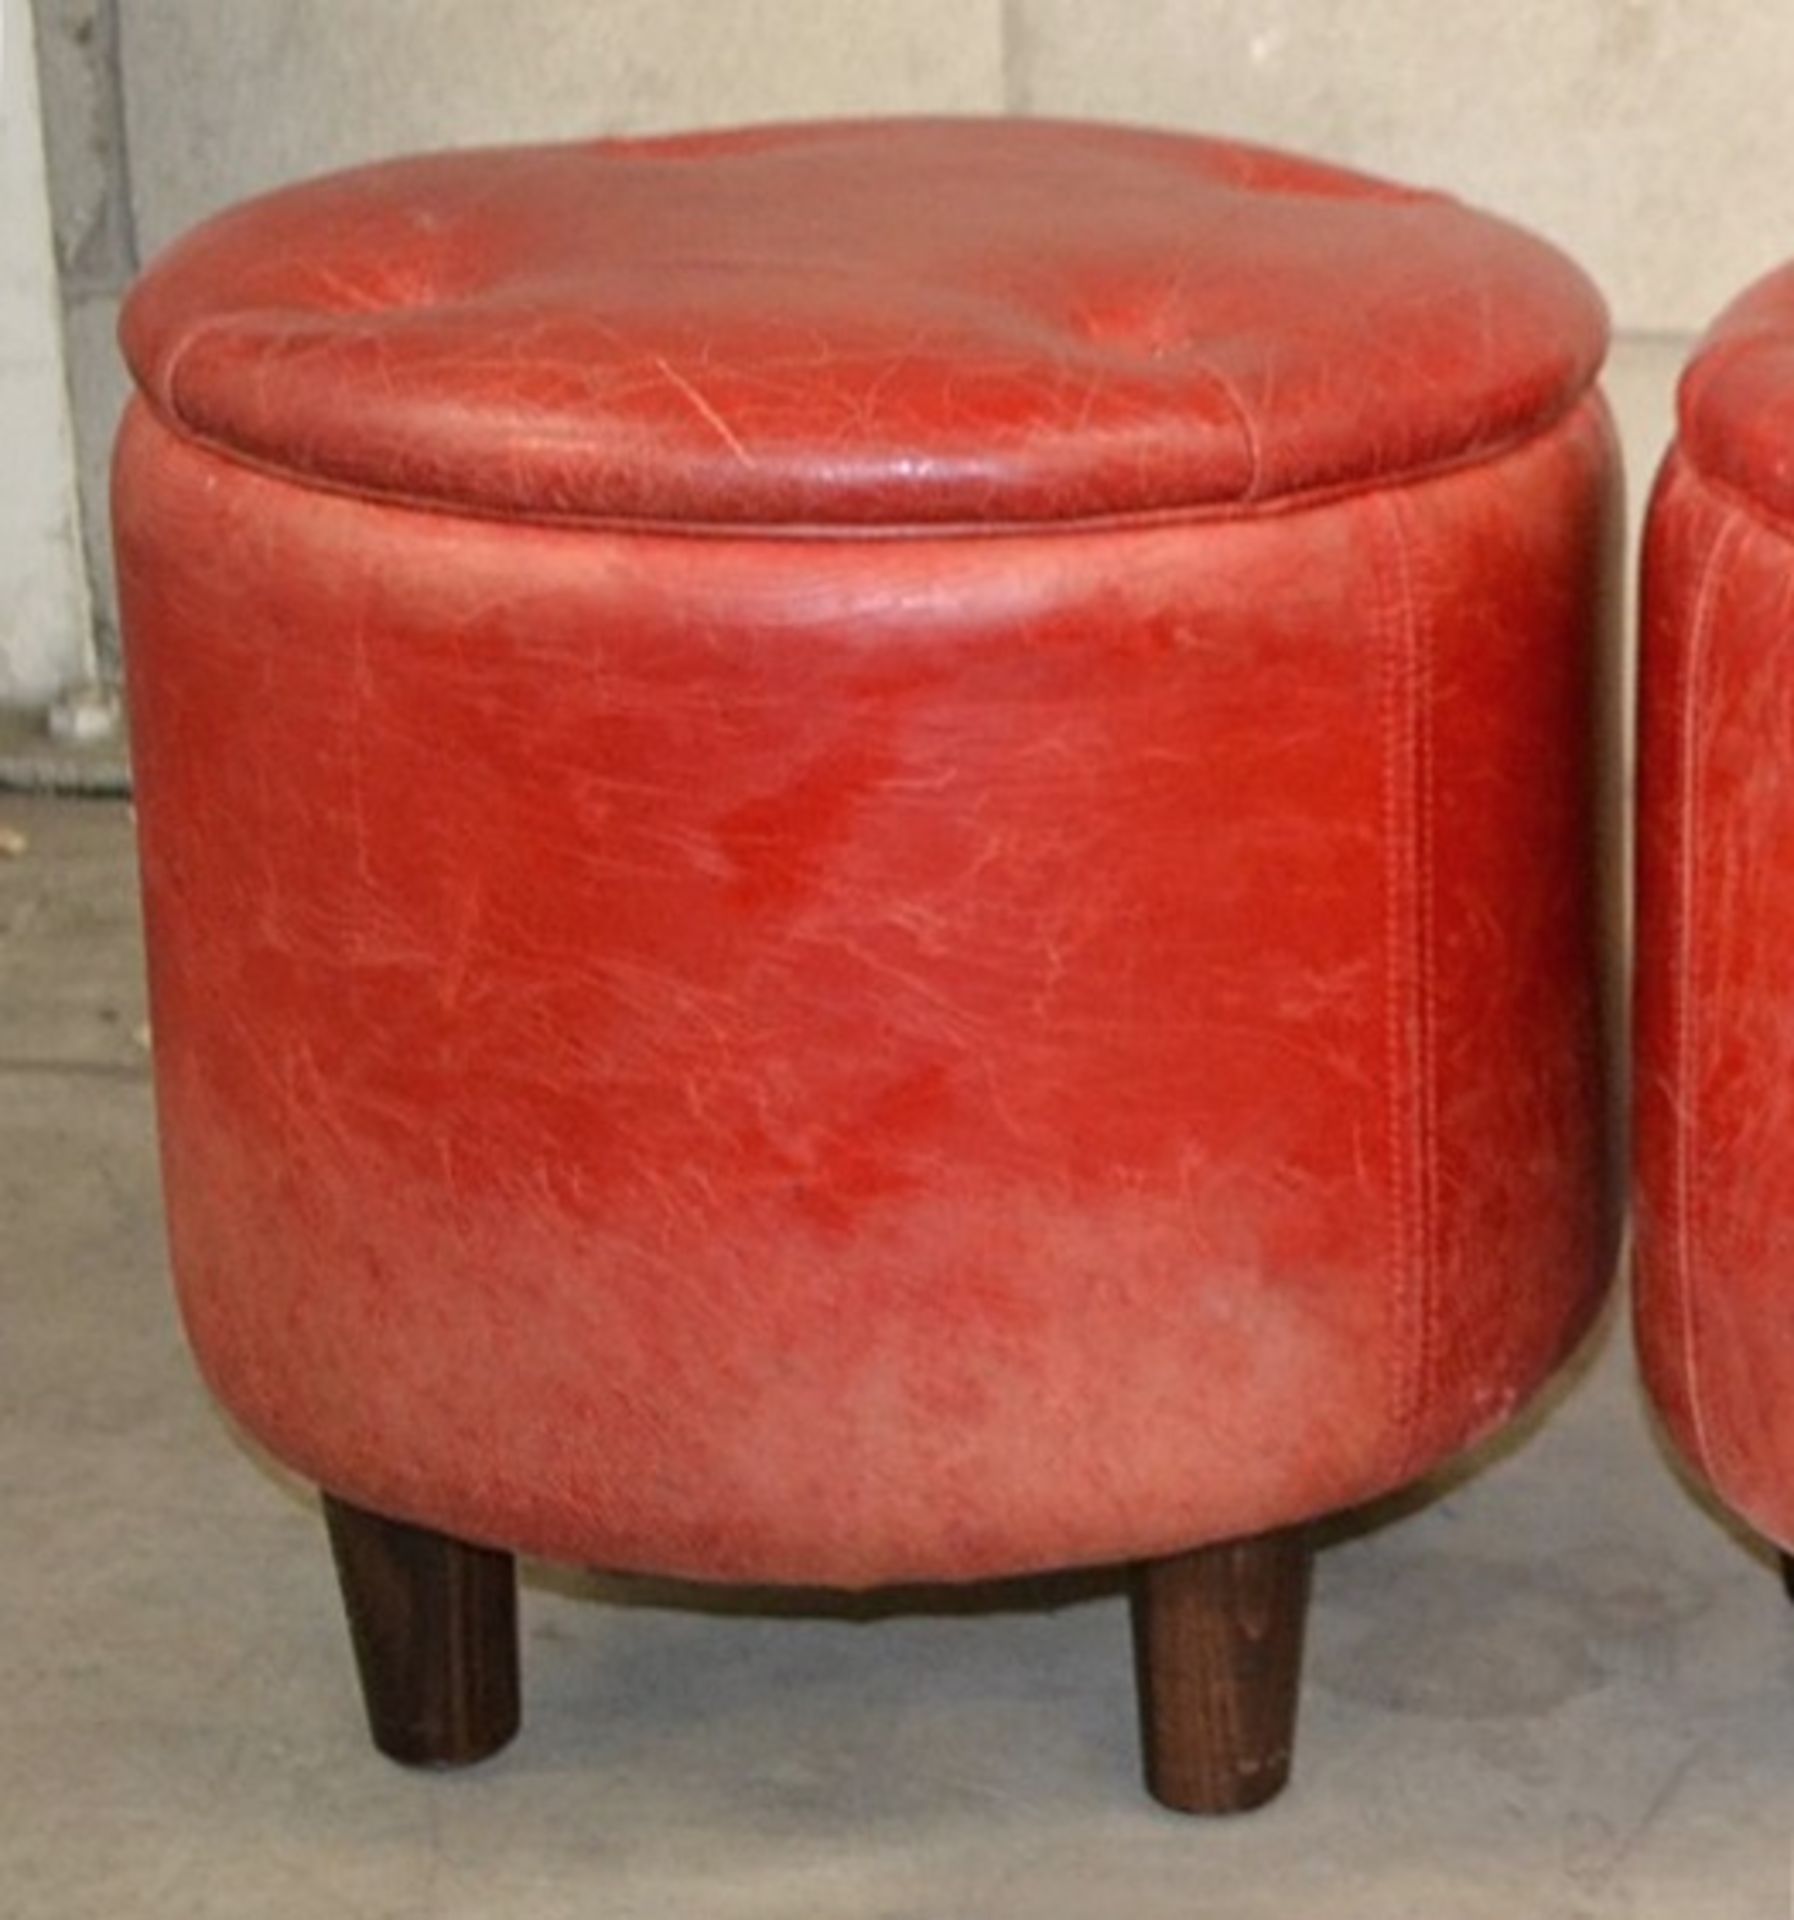 5 x Leather Upholsterd Stools In Red - Dimensions: Height 47cm, Diameter 45cm